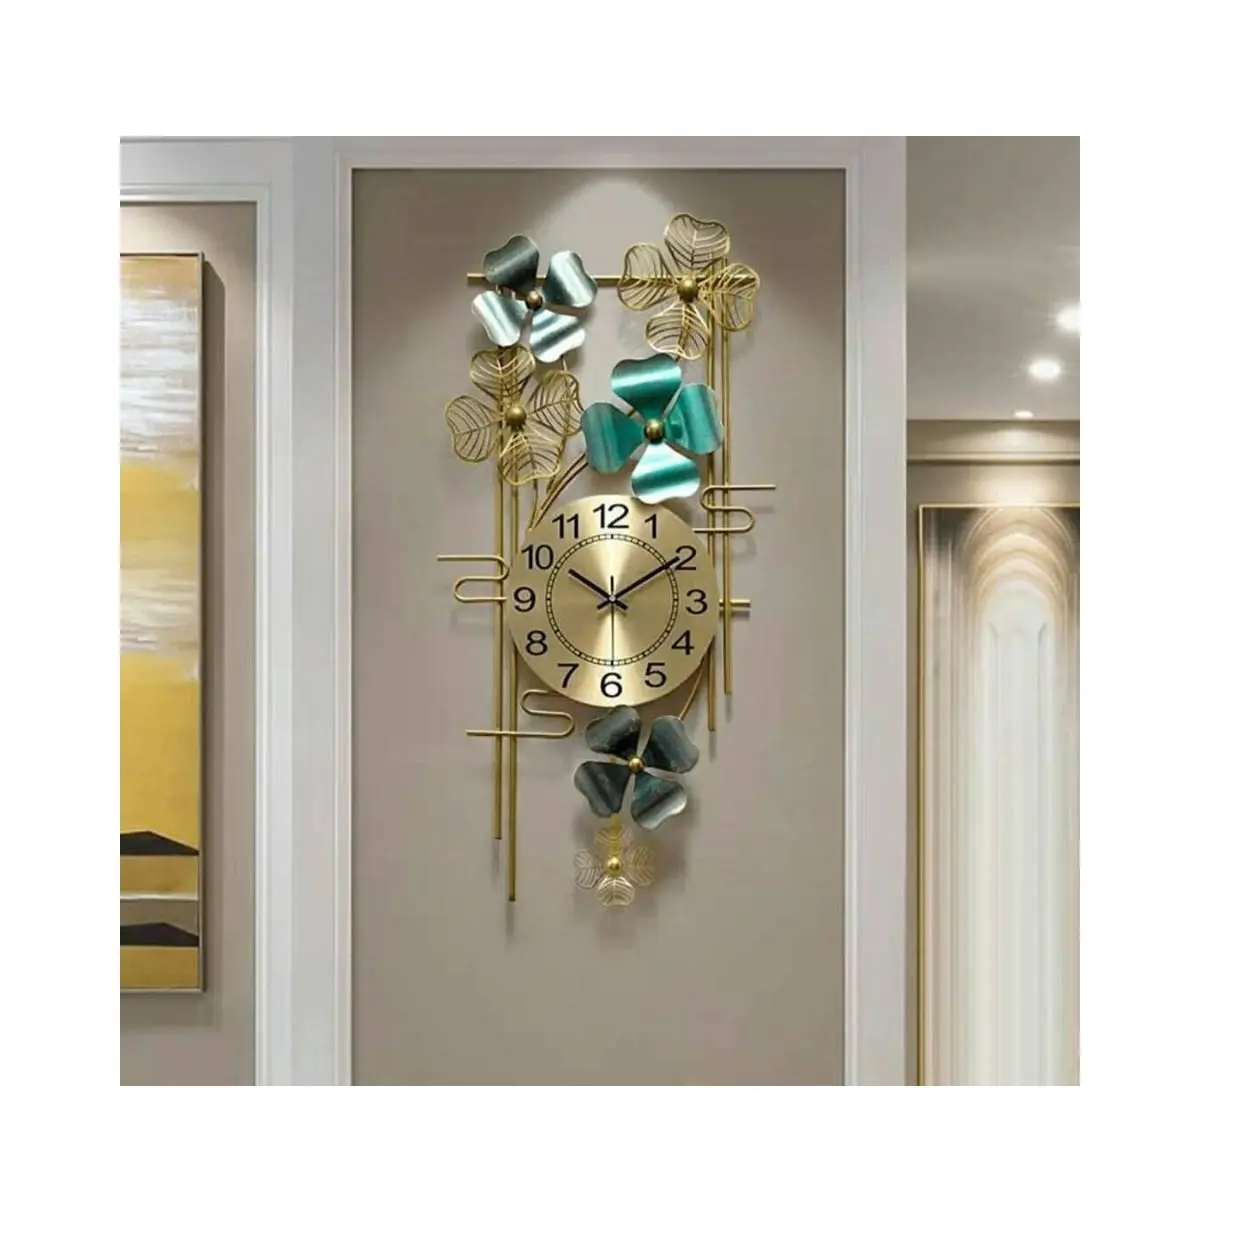 Hot seller Modern Metal Wall Clock Wall Decor Home Decoration Pieces Luxury high quality metal wall arts from Indian Supplier